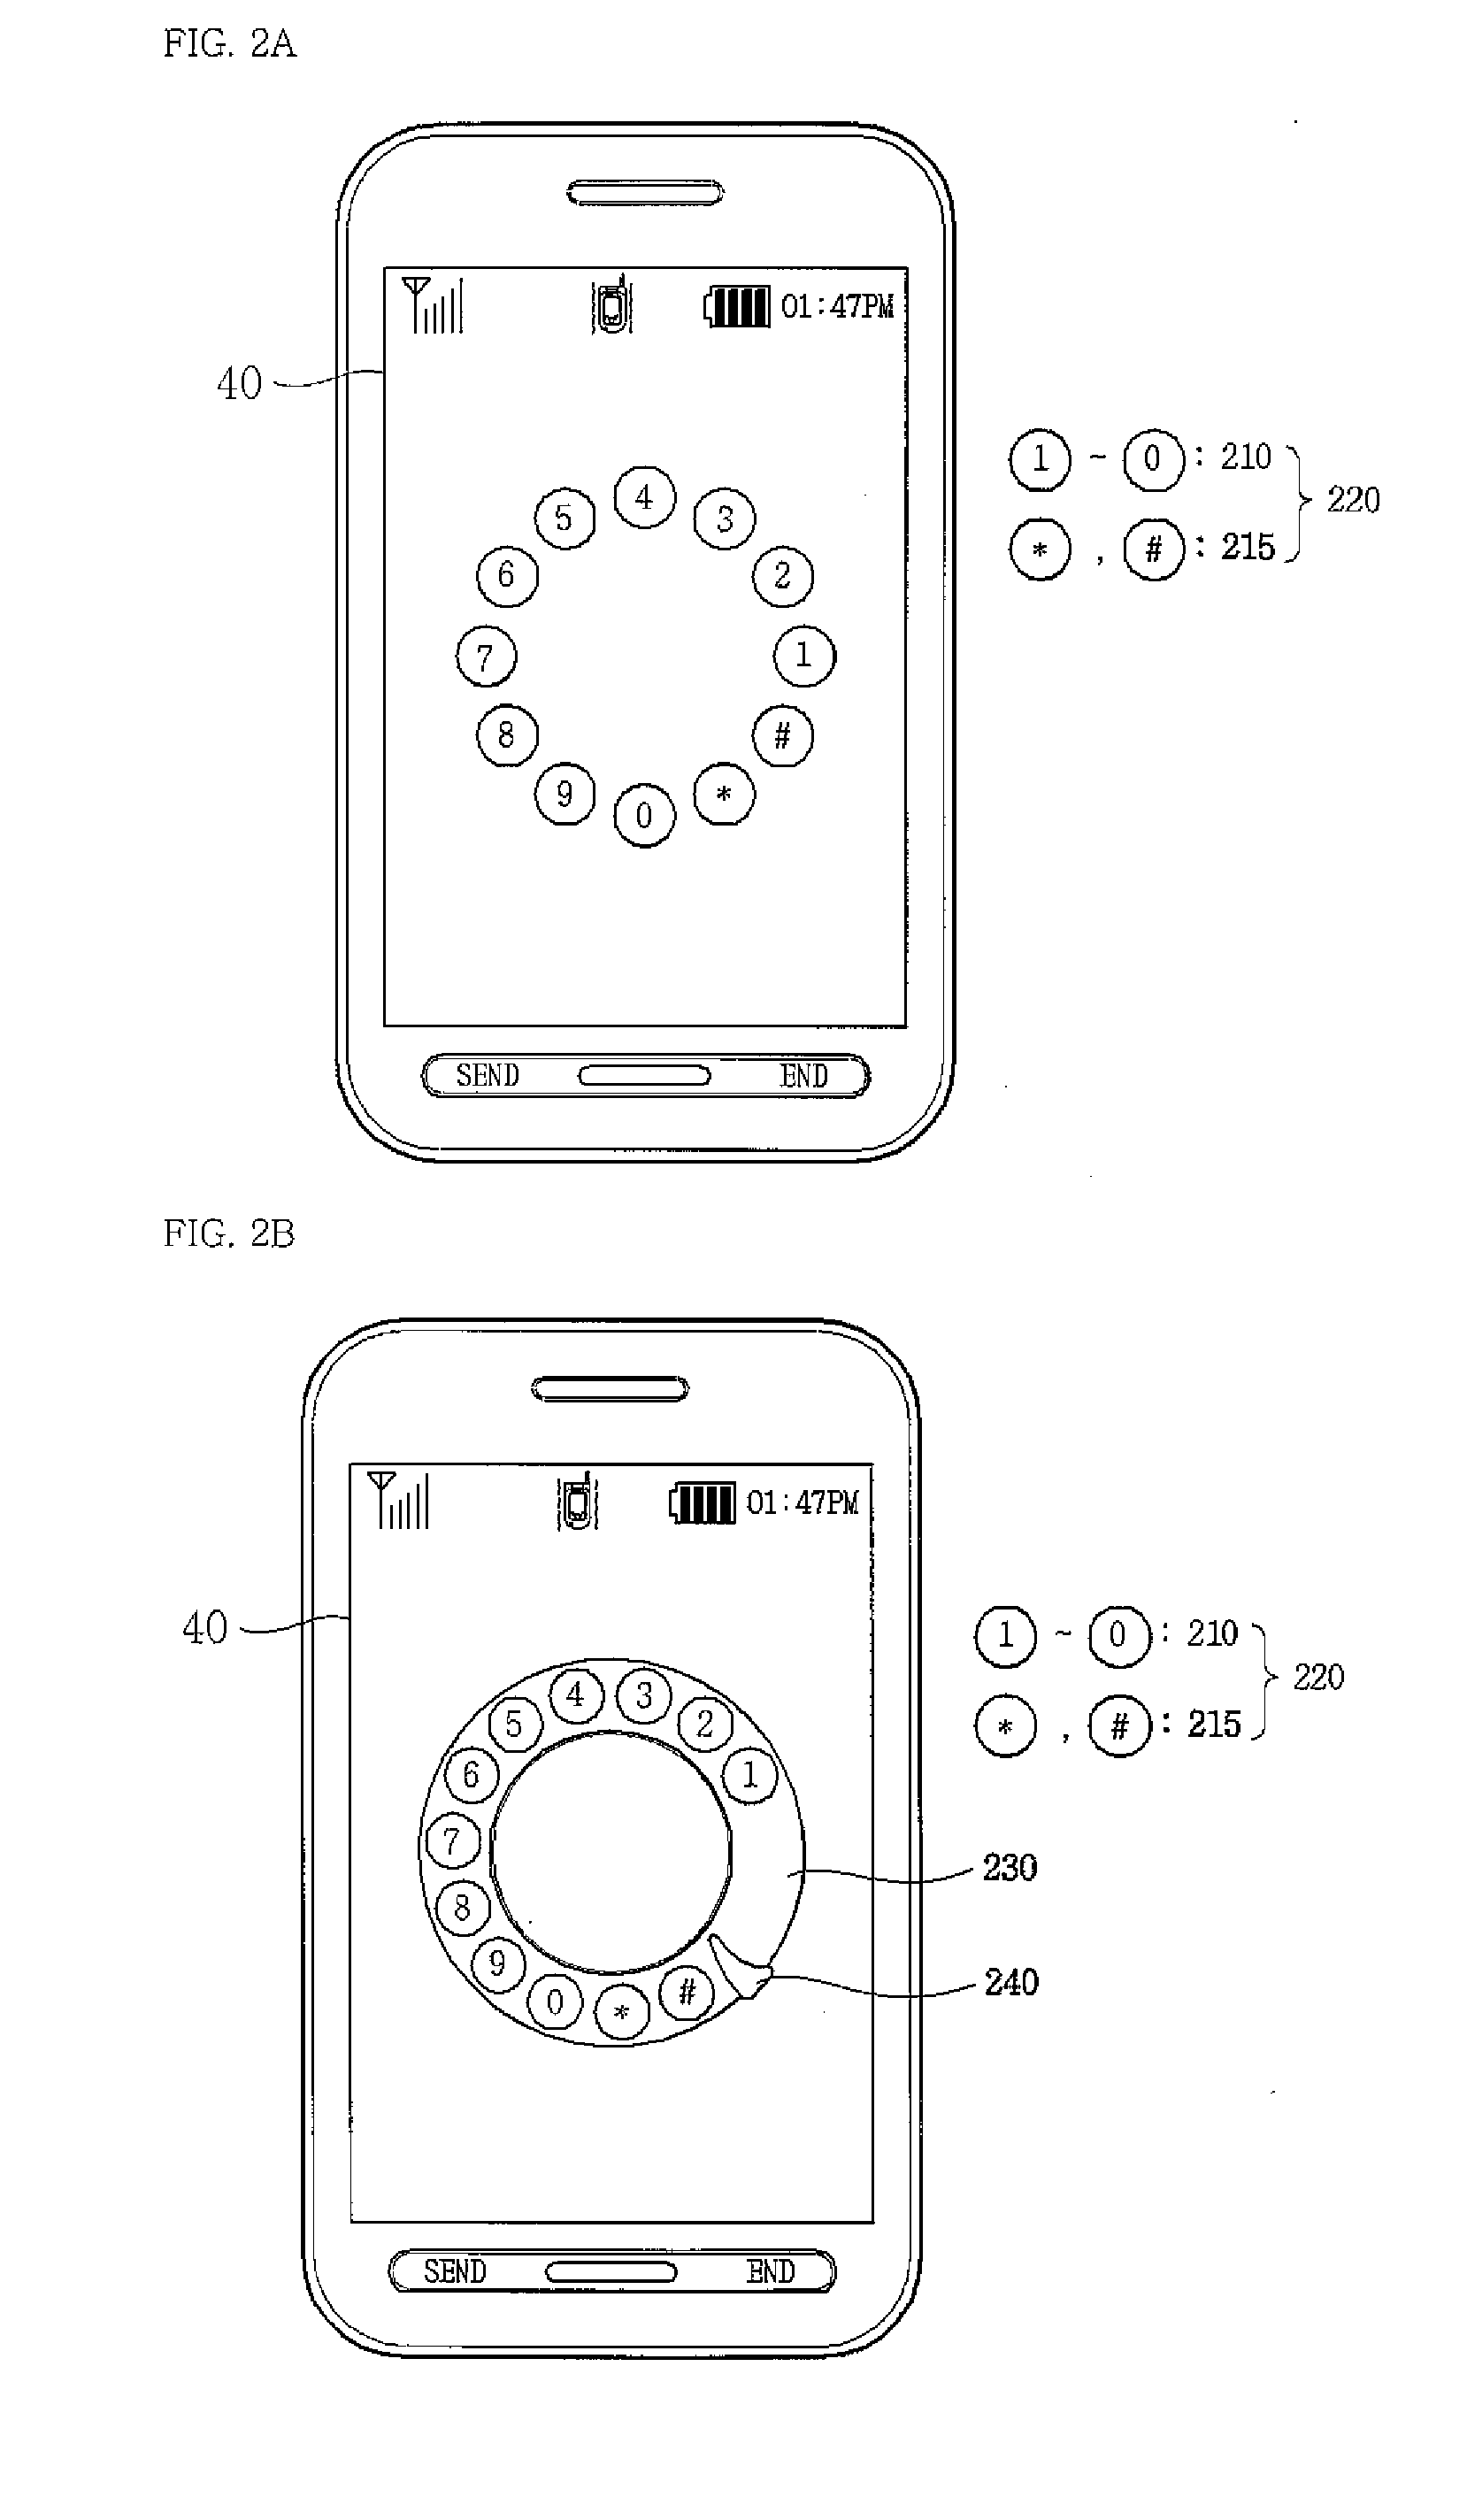 Executing functions through touch input device